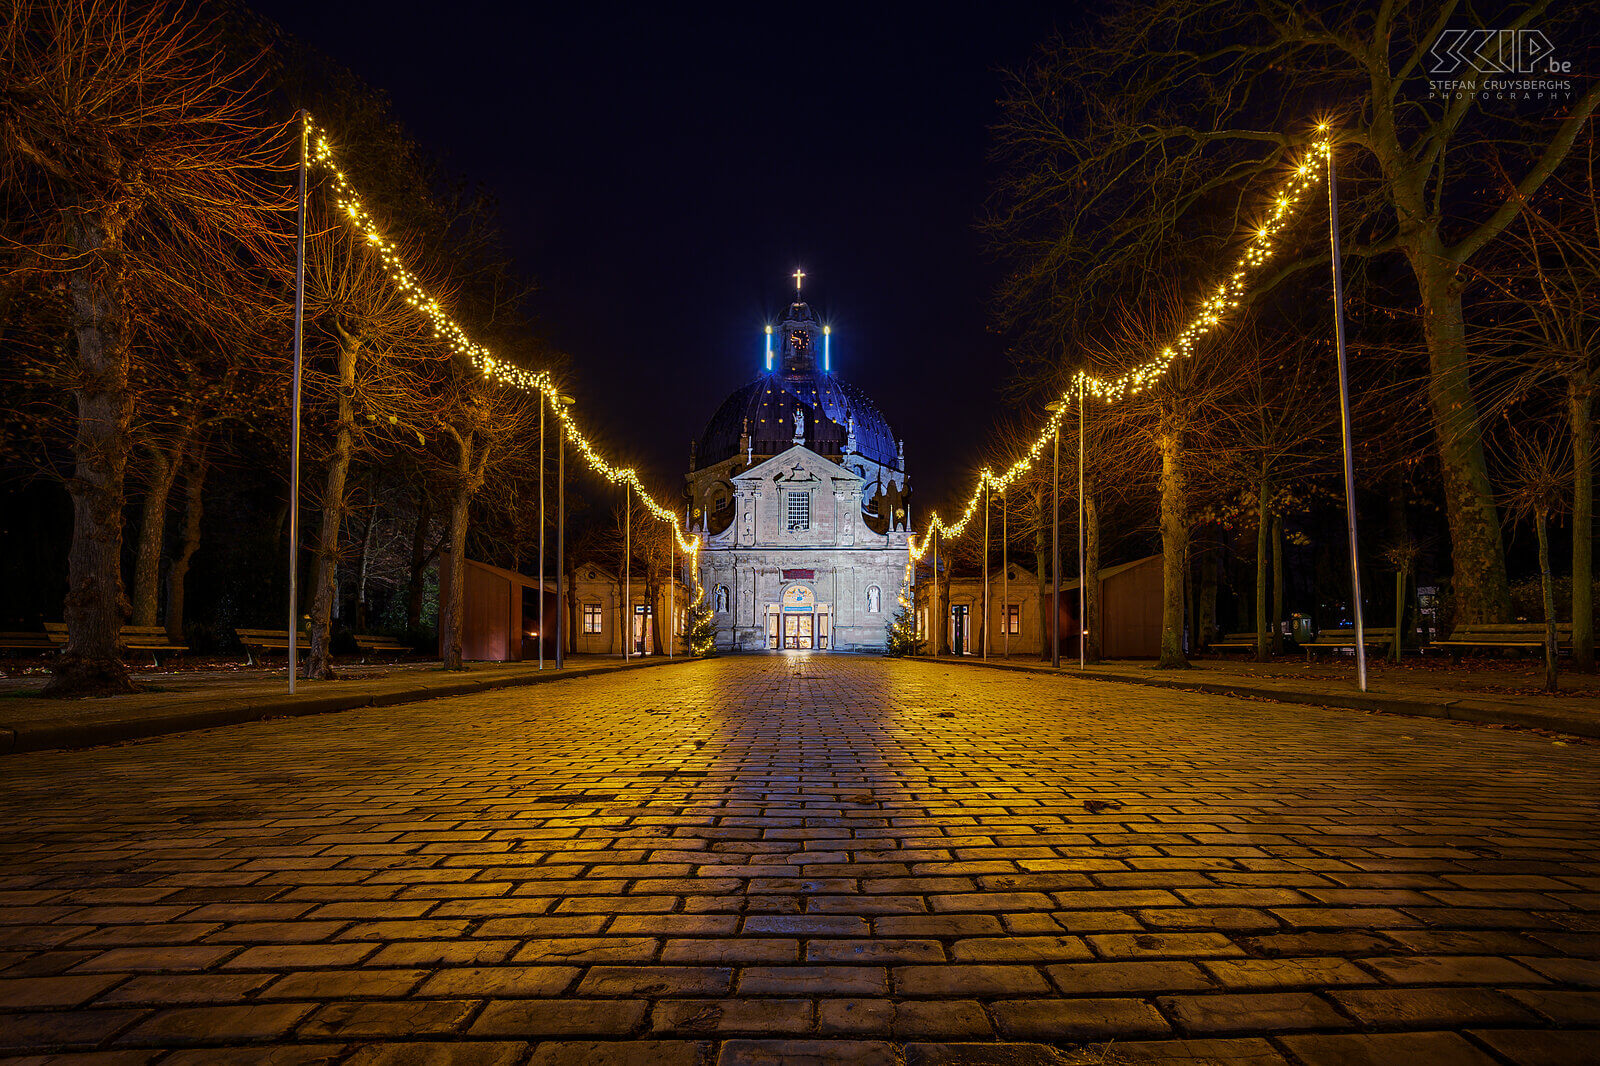 Hageland by night - Basilica of Scherpenheuvel An image from the end of 2020 with the Christmas decorations and Advent candles on the dome of our basilica in Scherpenheuvel. The Basilica of Our Lady is the most important pilgrimage site in Belgium. Stefan Cruysberghs